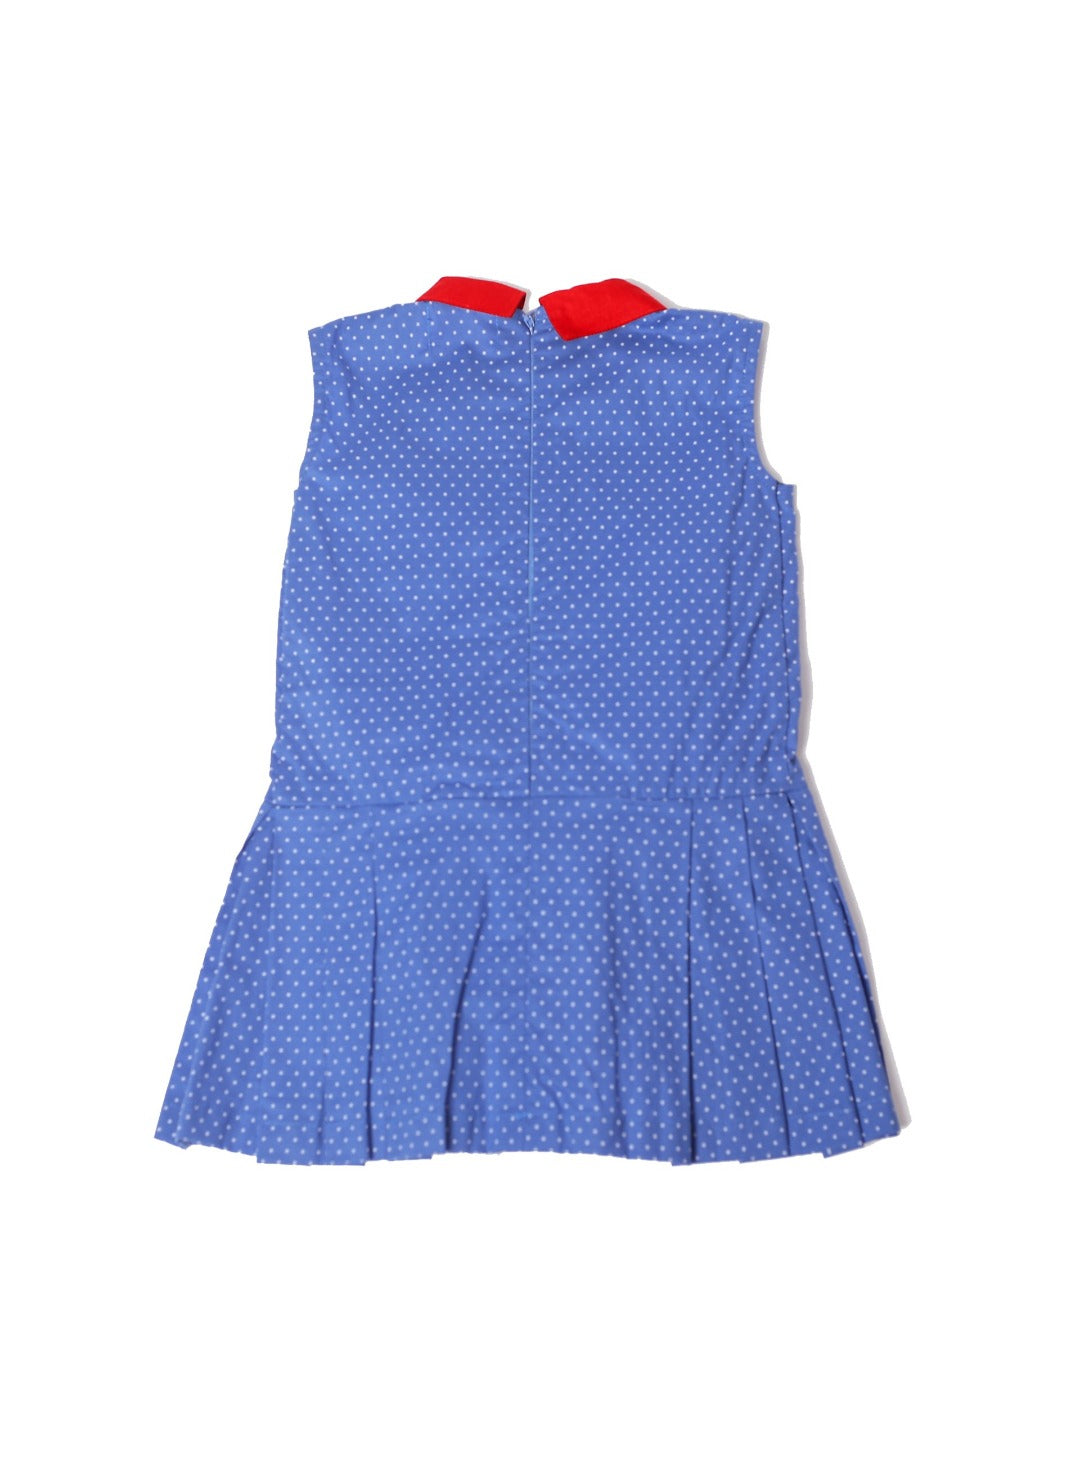 royal blue dress with contrasting red collar